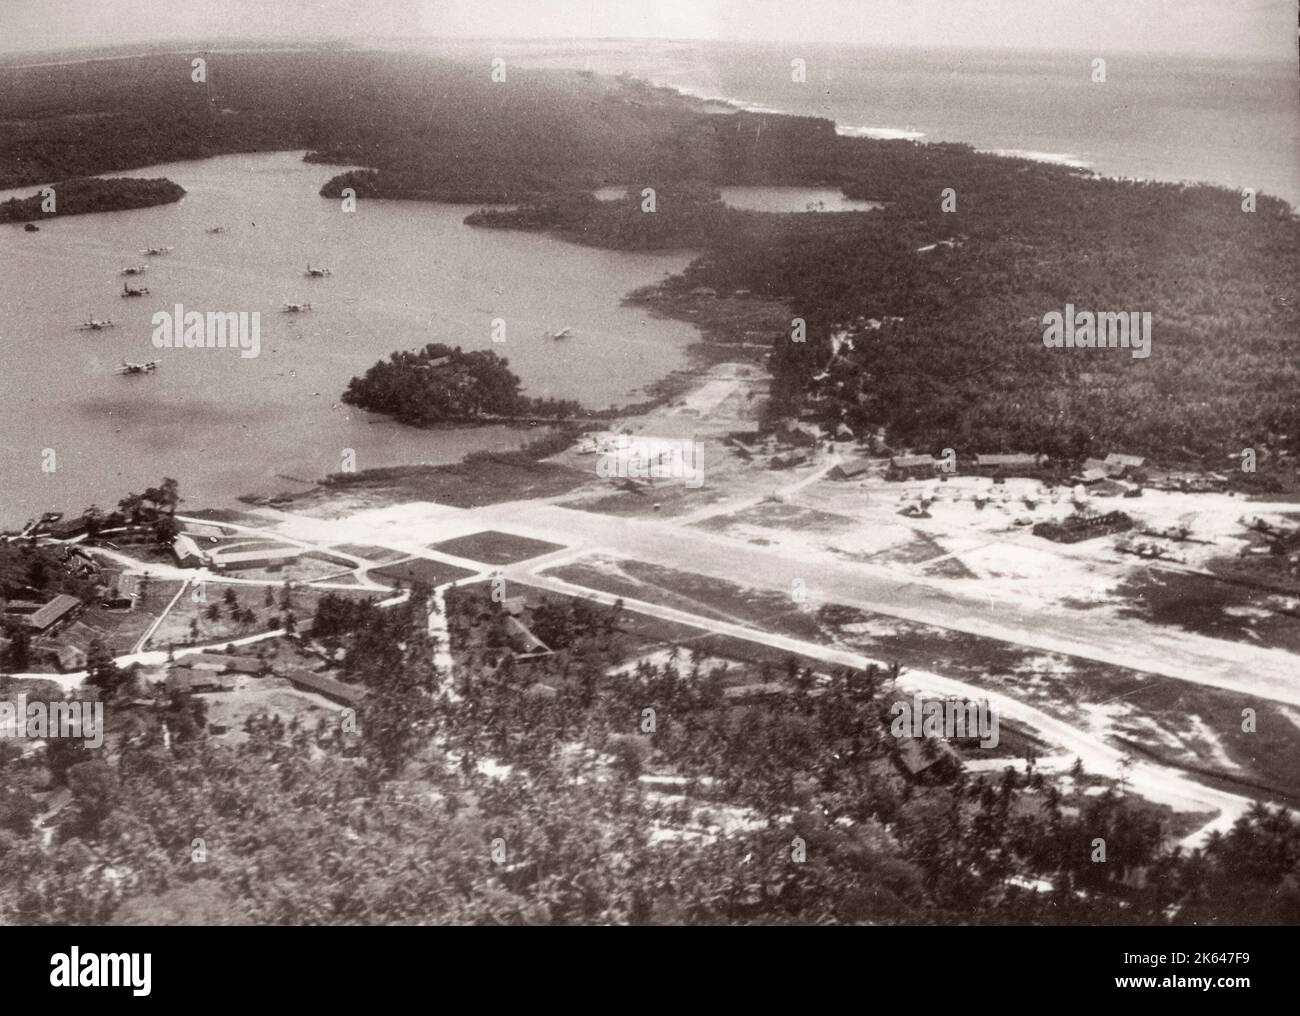 1940s Indian Ocean - airstrip at Galle, Ceylon, Sri Lanka Photograph by a British army recruitment officer stationed in East Africa and the Middle East during World War II Stock Photo